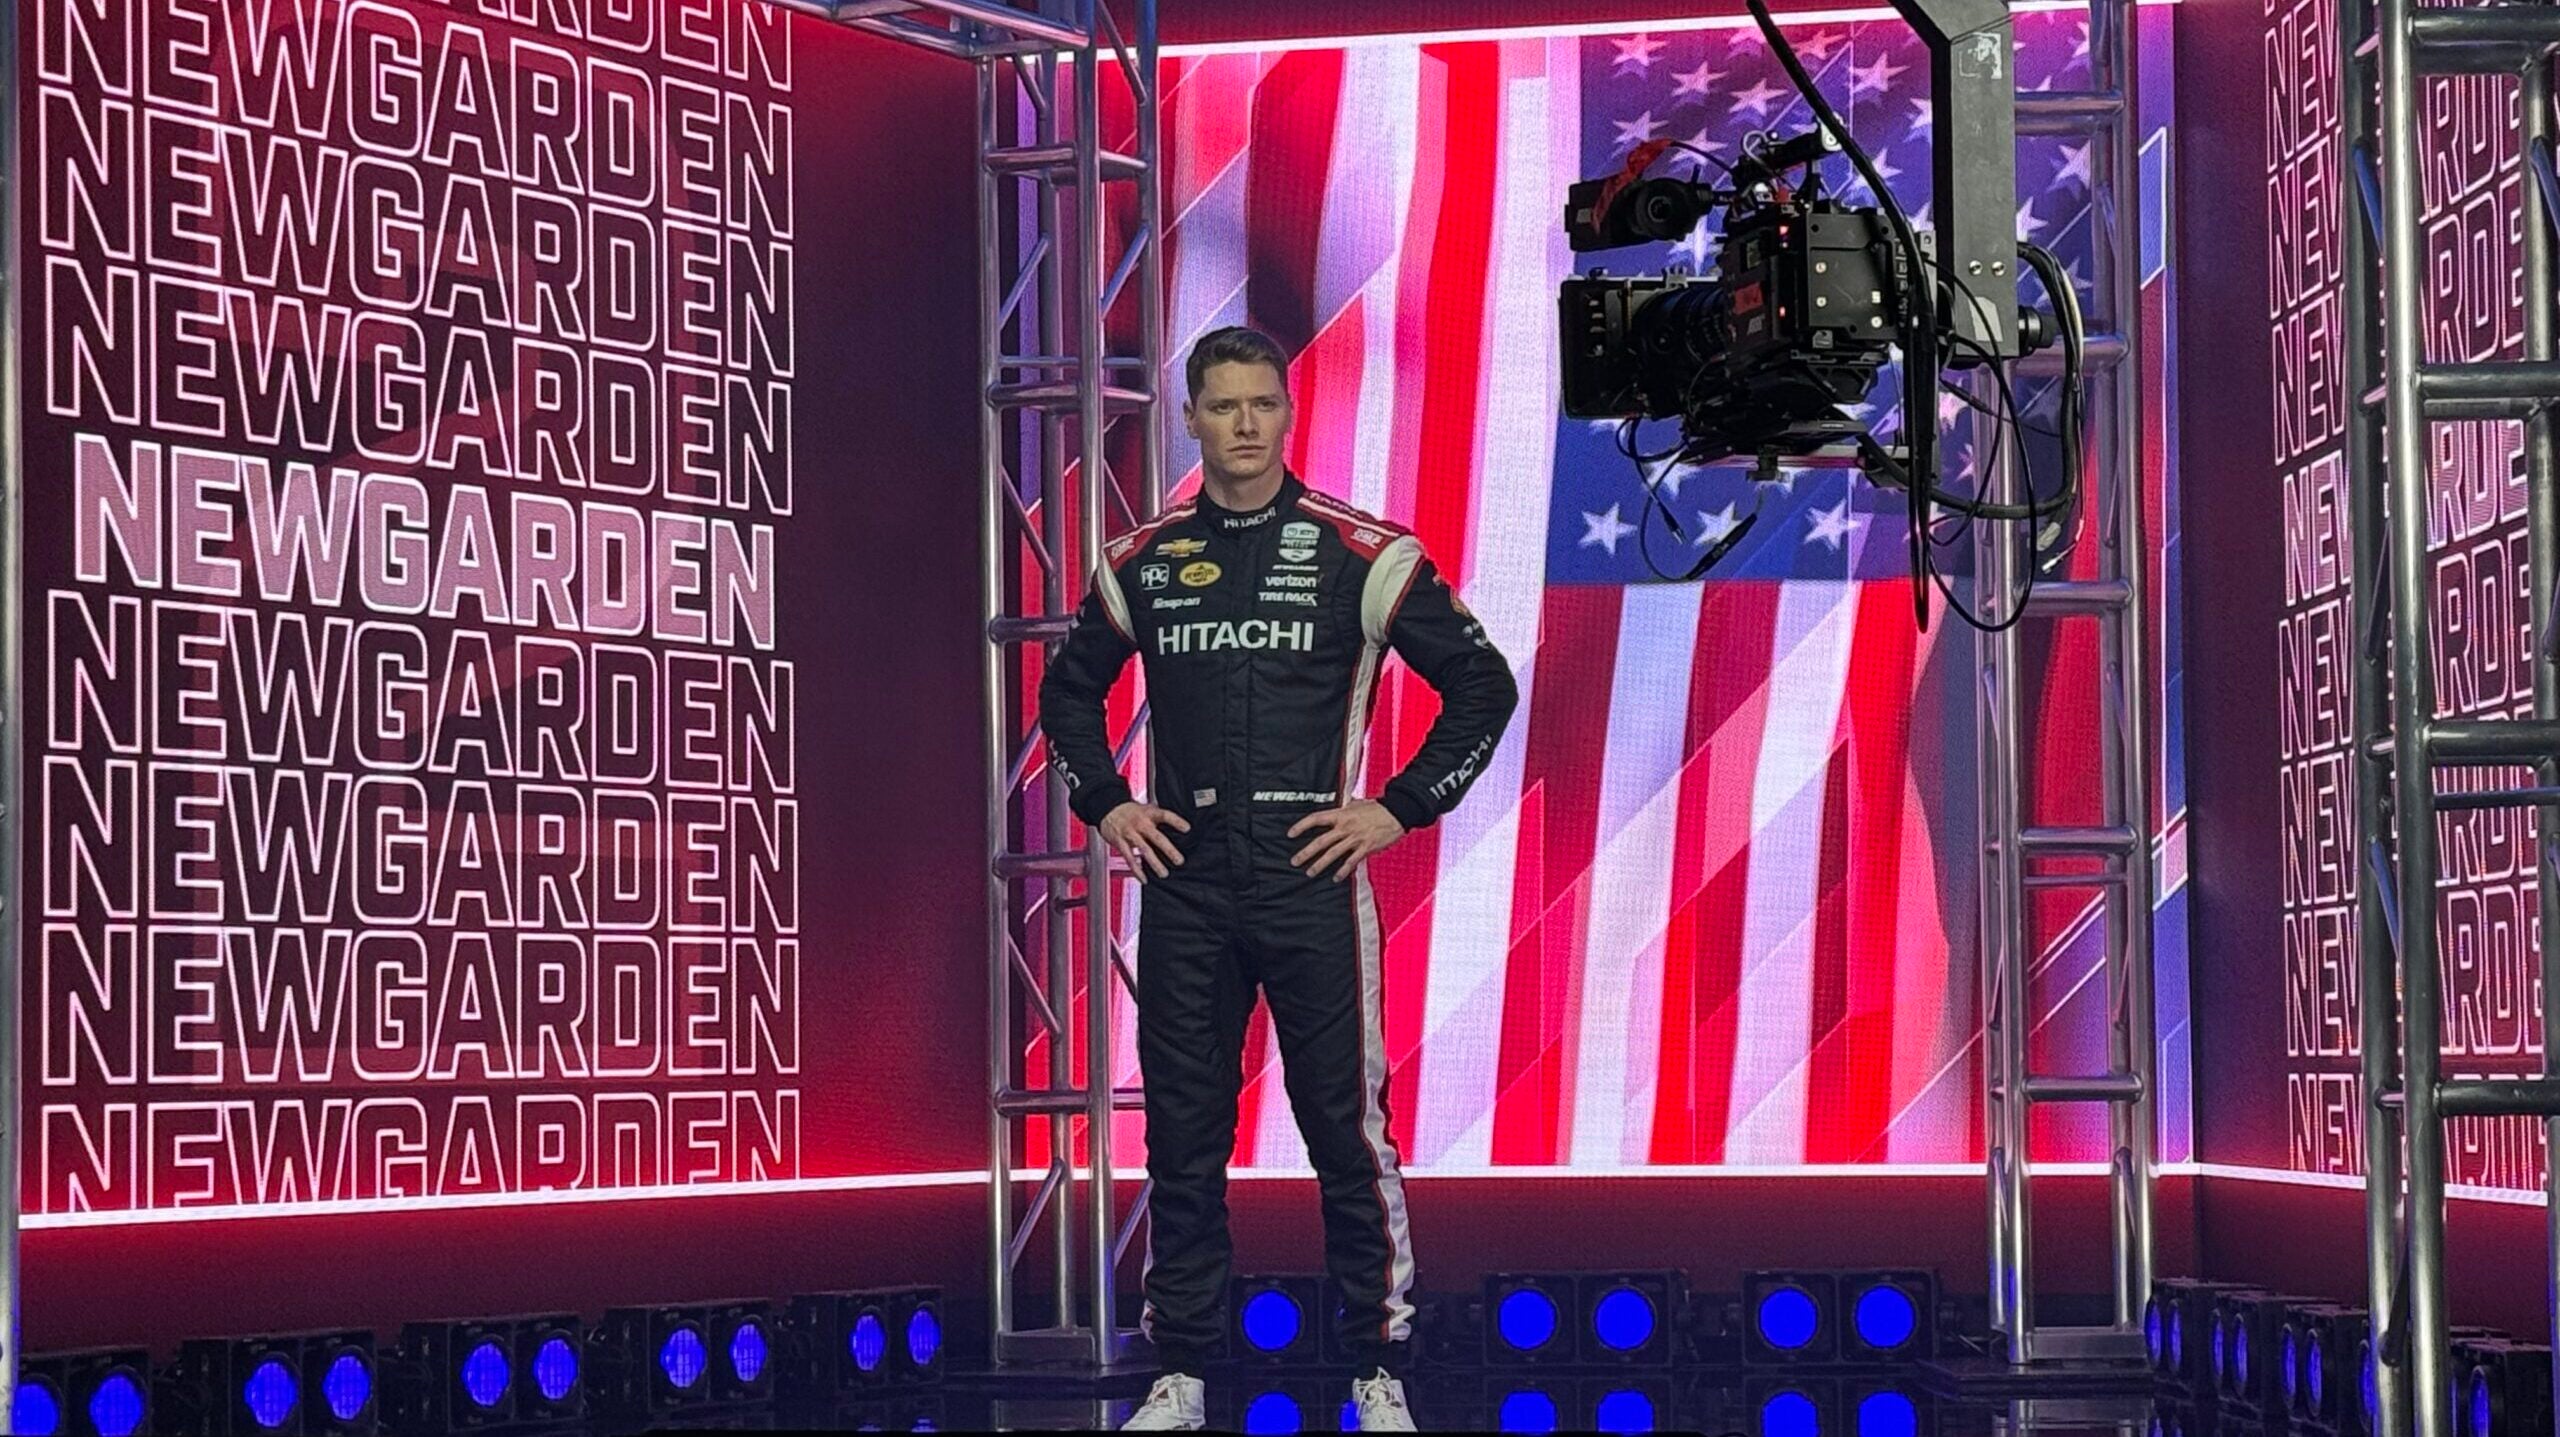 Josef Newgarden posing for the cameras at IndyCar Media Day at the JW Marriott in Downtown Indianapolis. (WISH Photo)